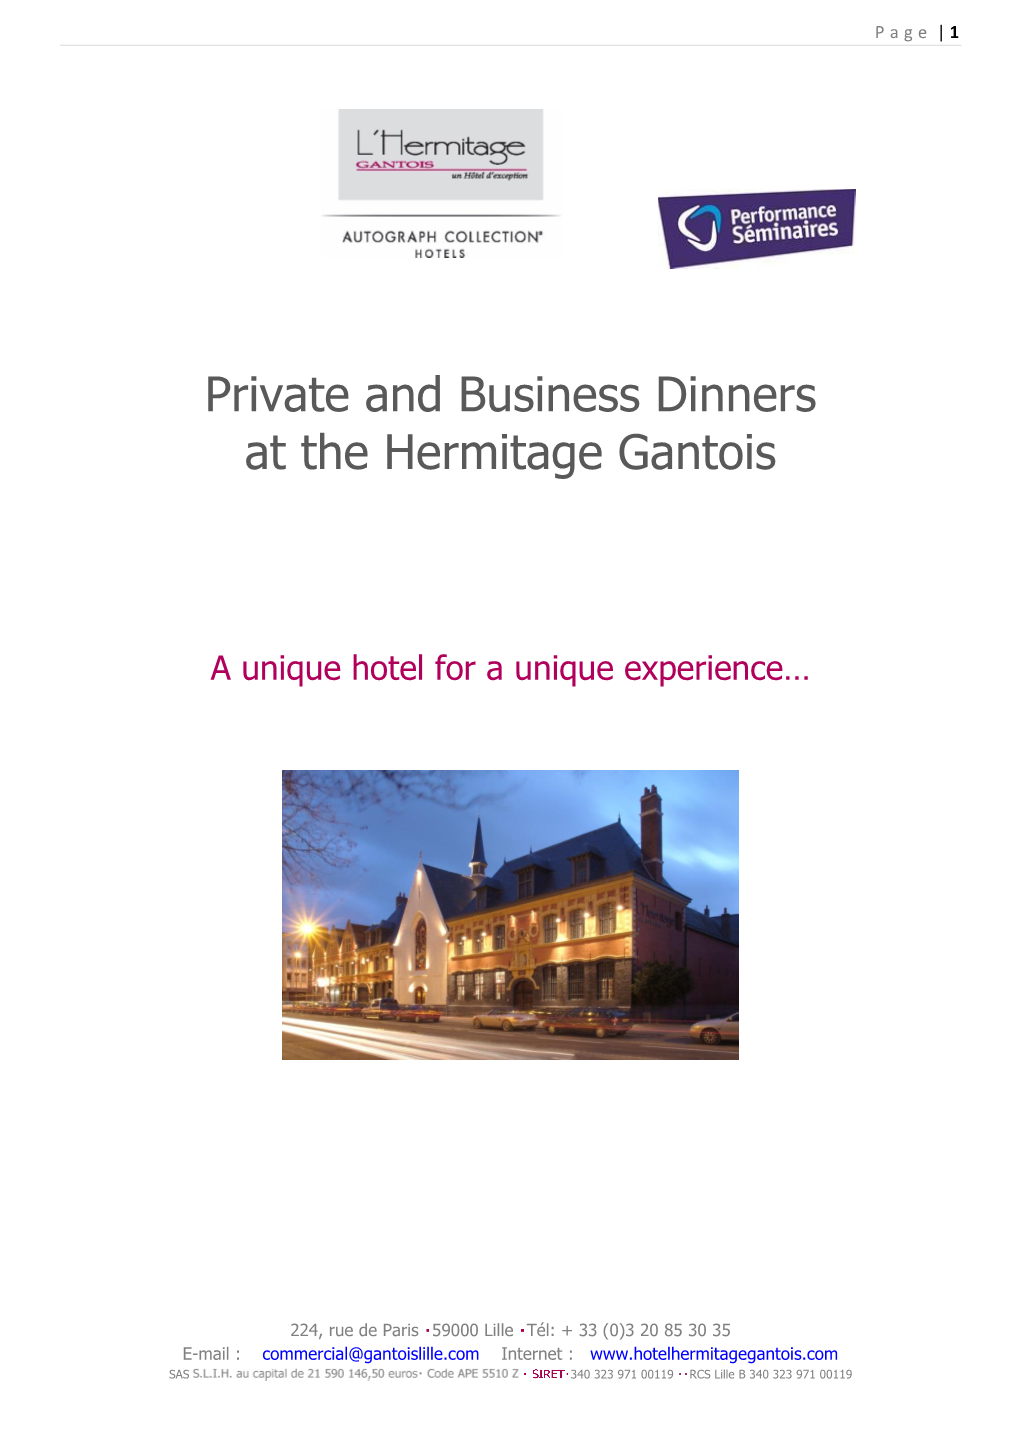 Private and Business Dinners at the Hermitage Gantois